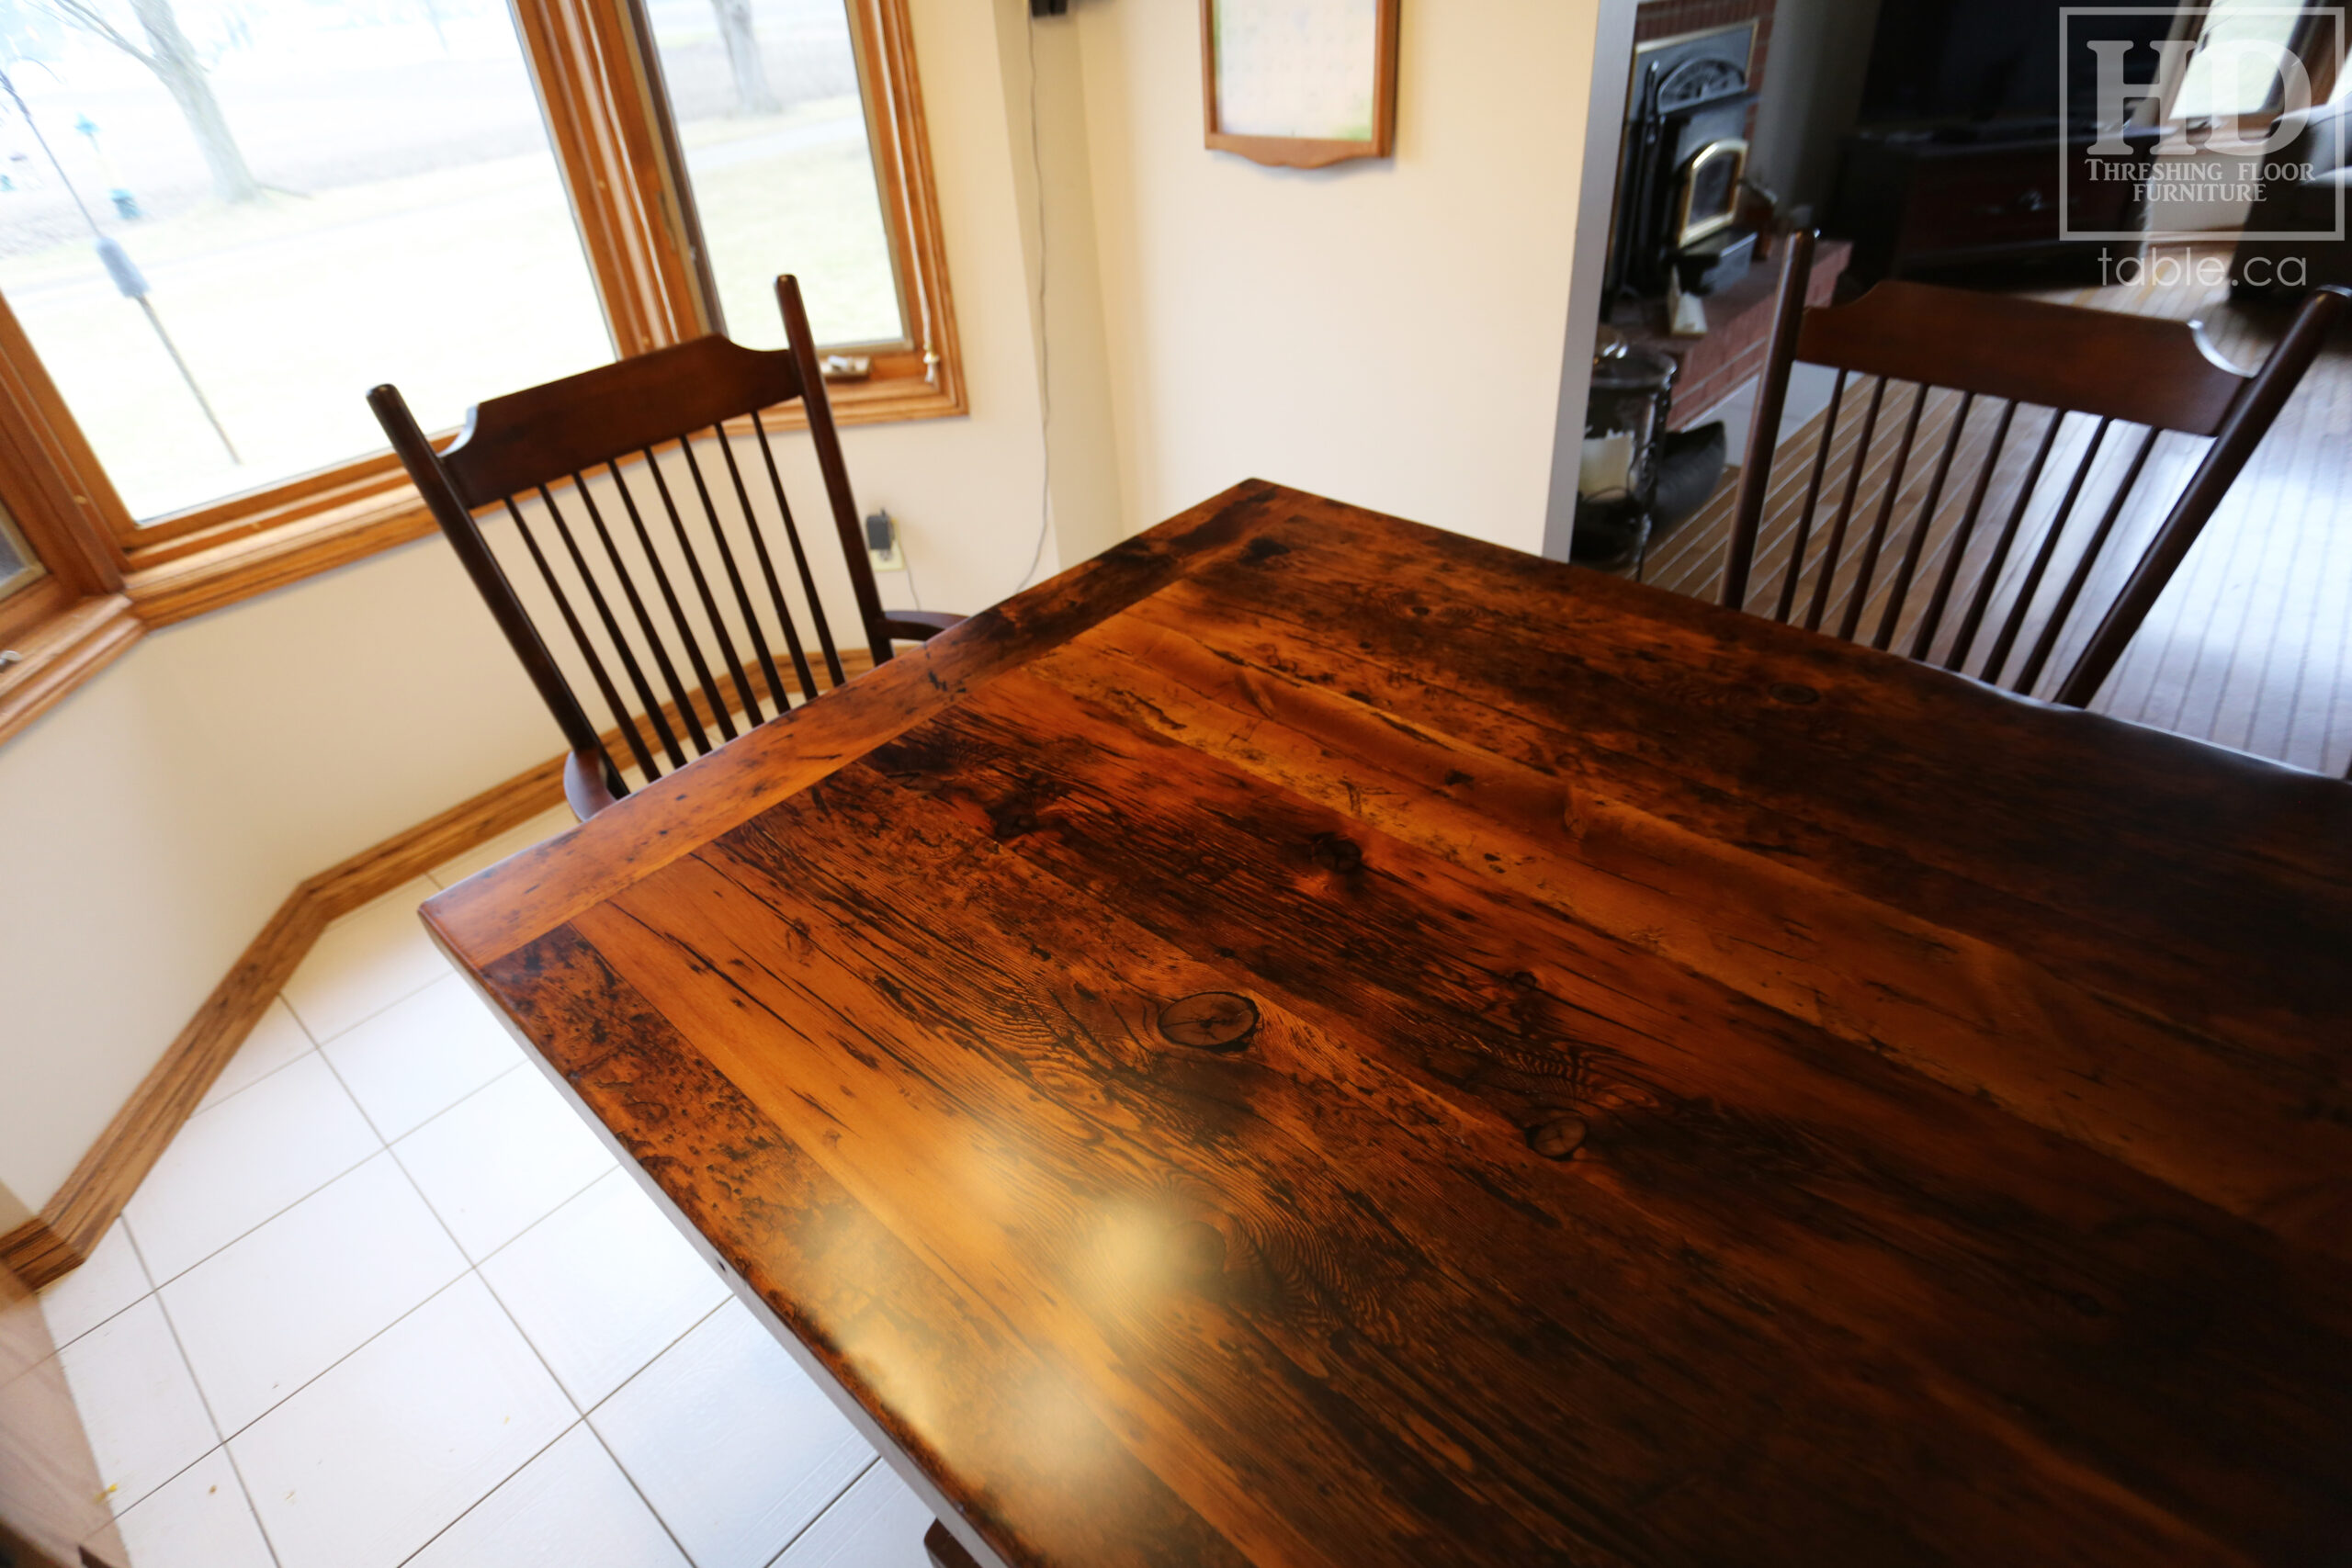 6’ Reclaimed Ontario Barnwood Table we made for a Guelph, Ontario home – 42” wide – Trestle Base - Old Growth Hemlock Threshing Floor Construction - Original edges & distressing maintained – Bread Edge Ends – Premium epoxy + satin polyurethane finish – Wormy Maple Buckhorn Chairs - www.table.ca